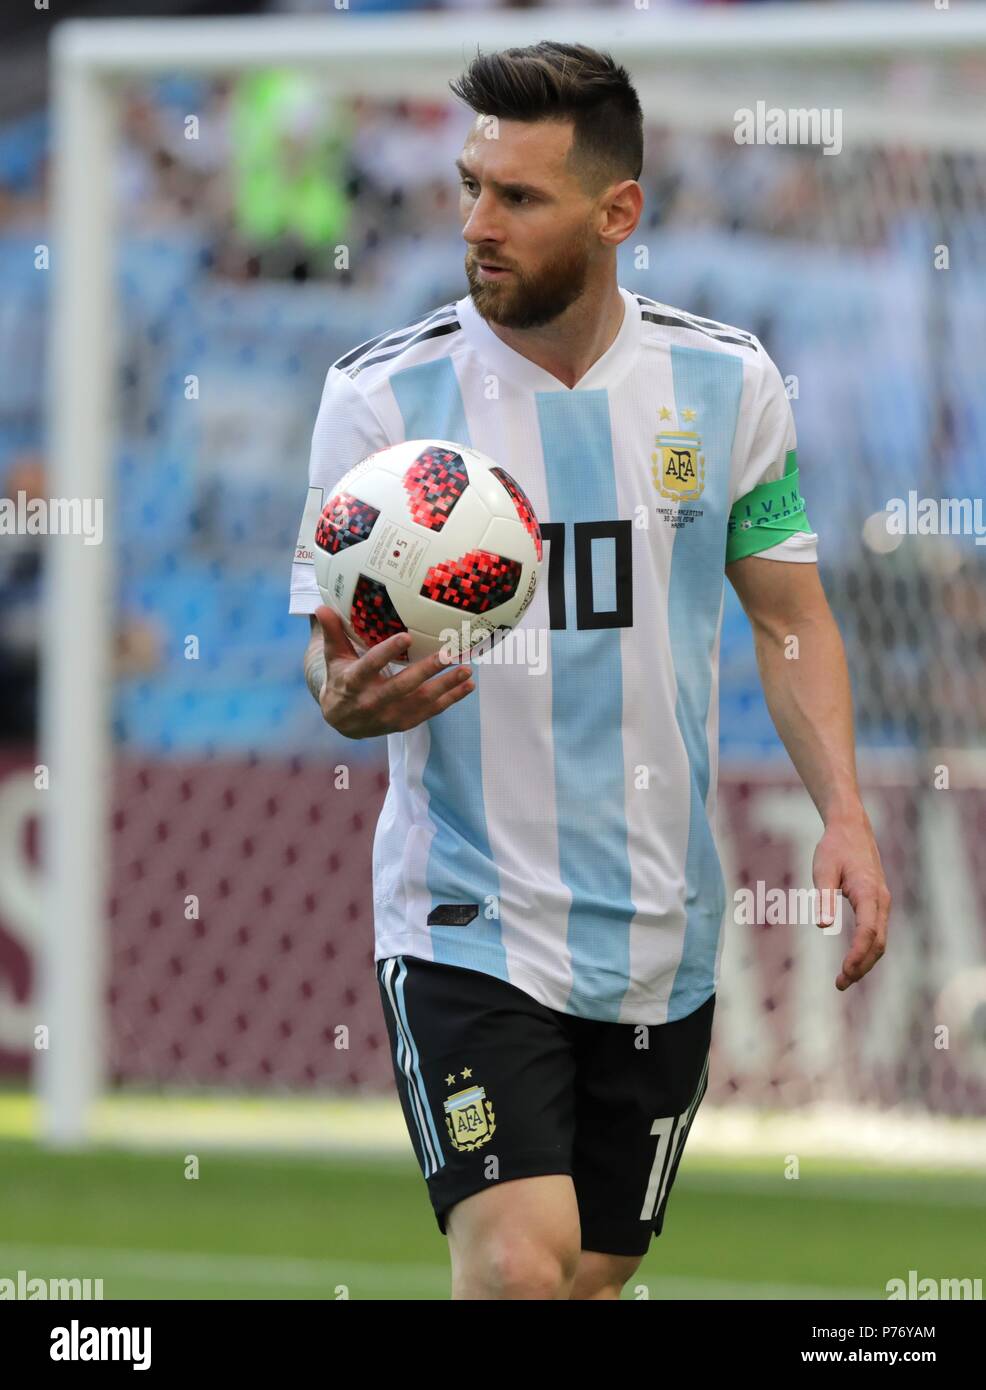 June 30, 2018. - Russia, Kazan. - 2018 FIFA World Cup round of 16 match. France v Argentina, 4:3. In picture: Argentina's player Lionel Messi (10). Stock Photo